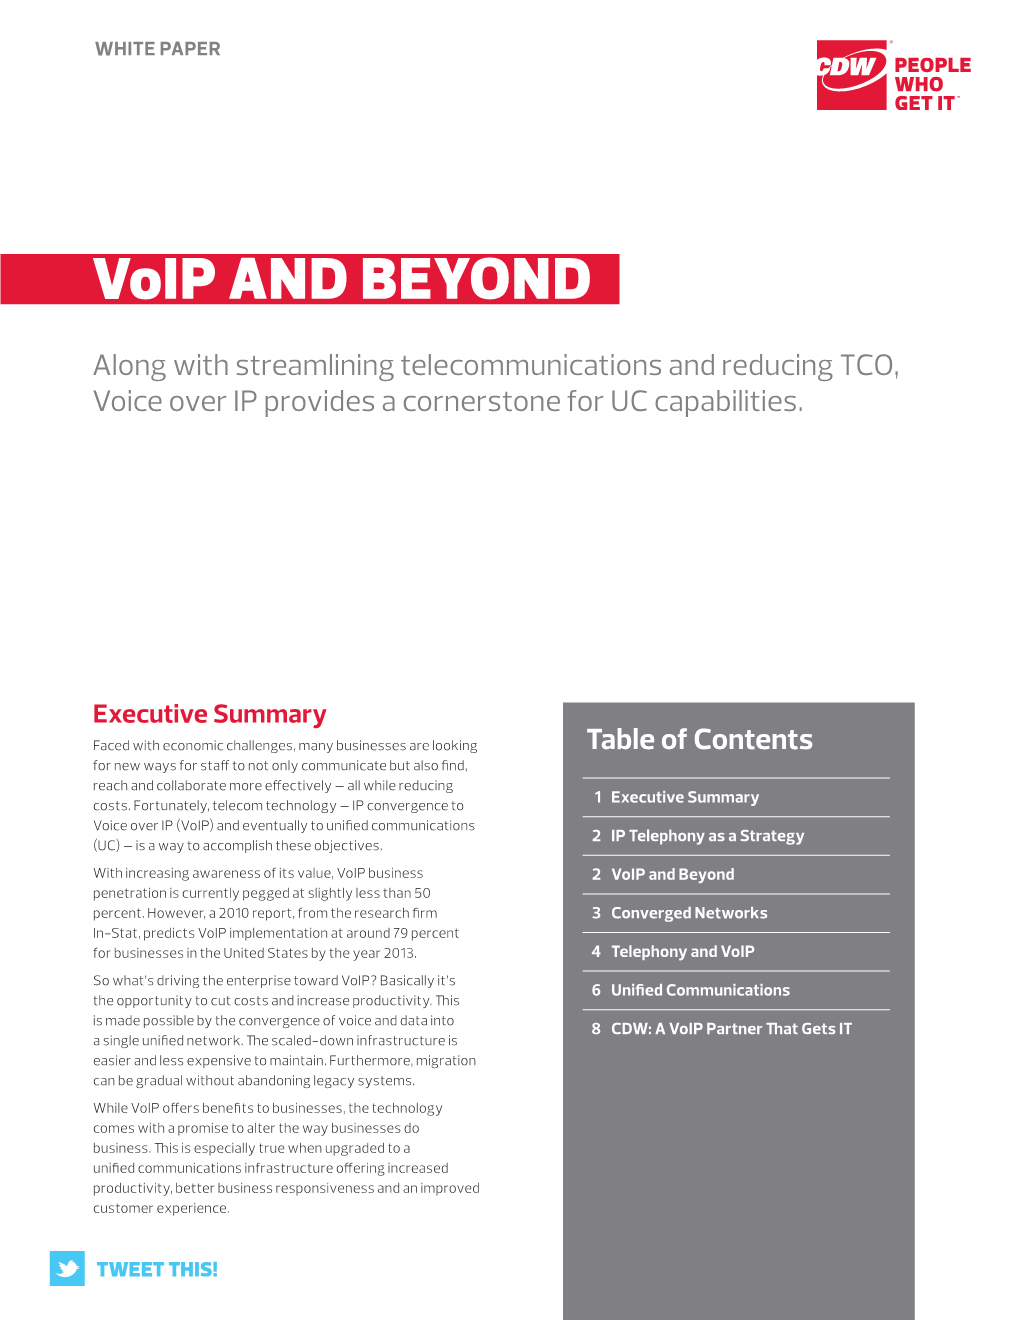 Voip and Beyond